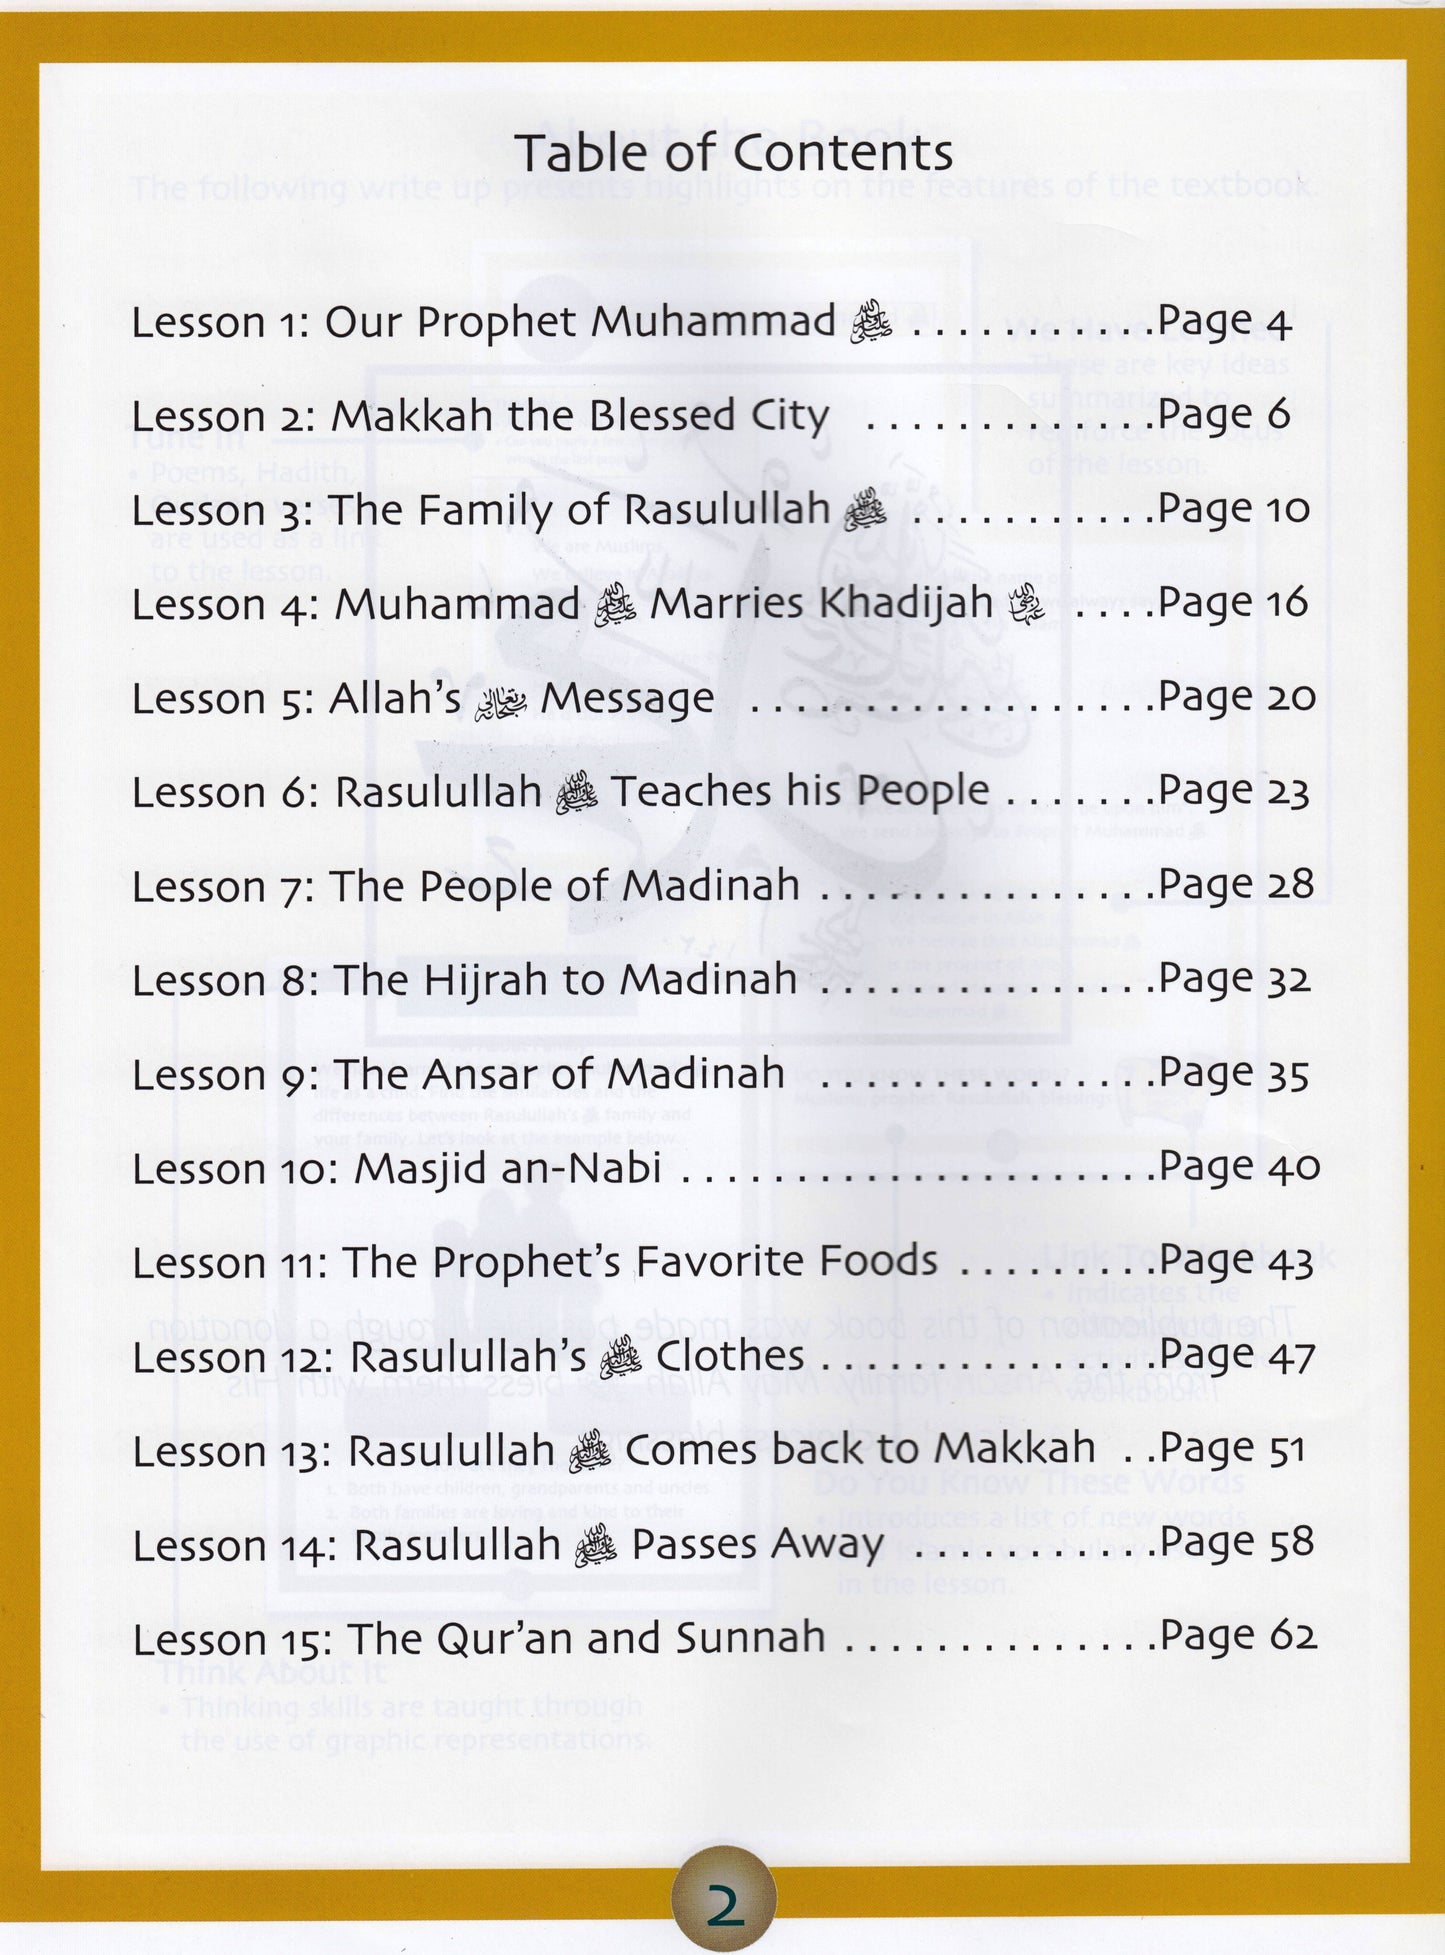 Sirah of our Prophet - Grade 1 Textbook